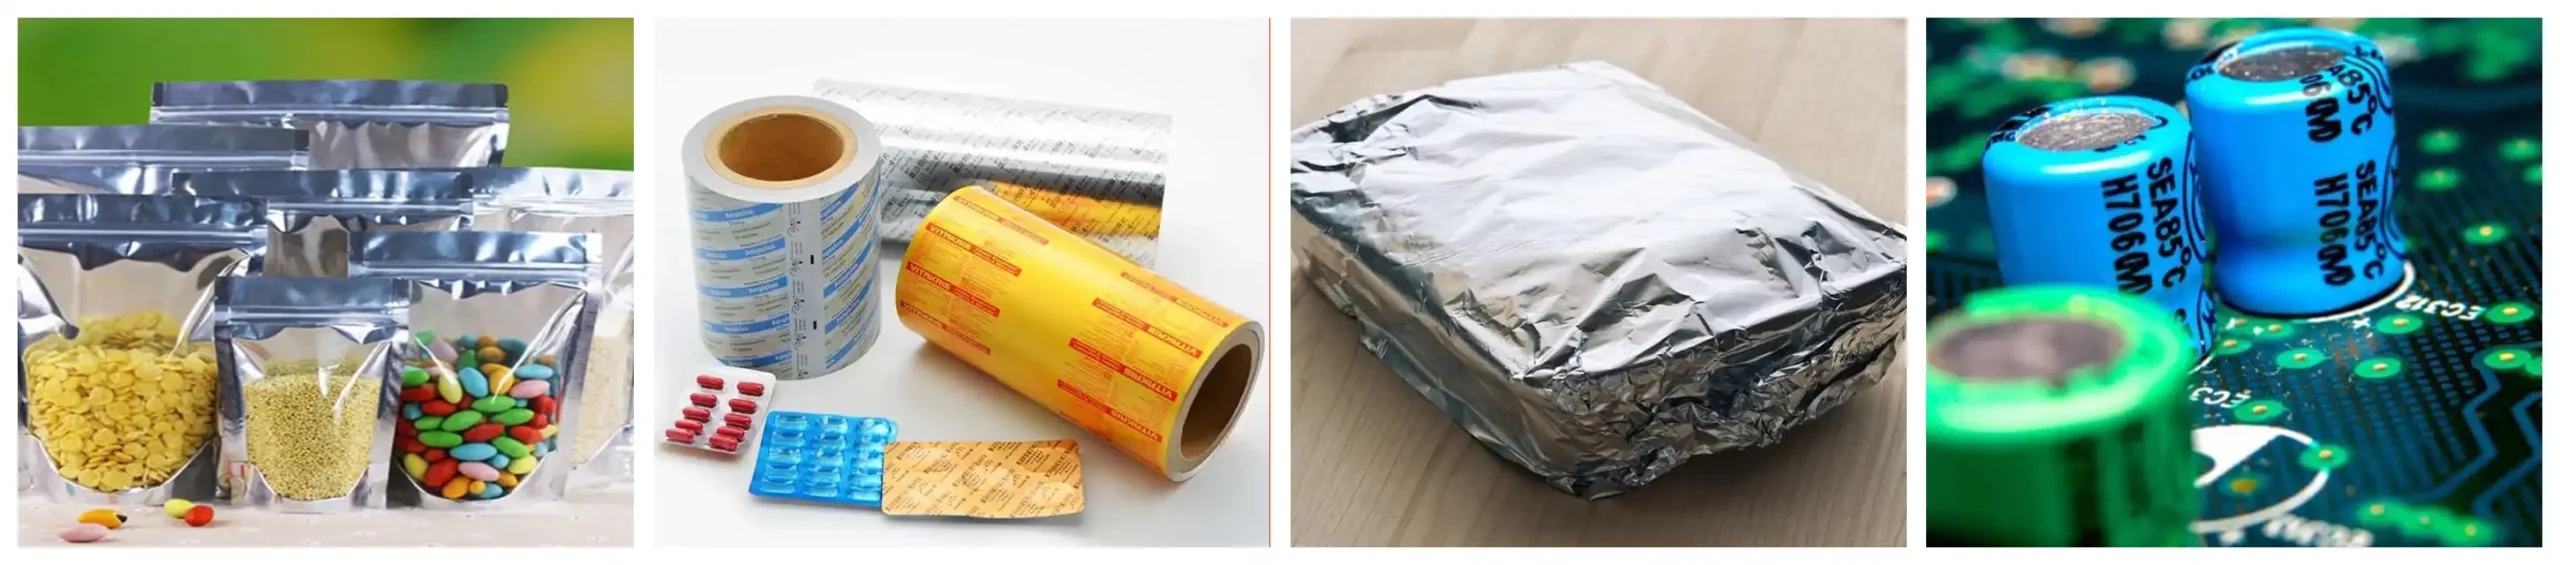 1070 aluminum foil for capacitors, transformers, and electrical cables, packaging applications, thermal and electrical qualities